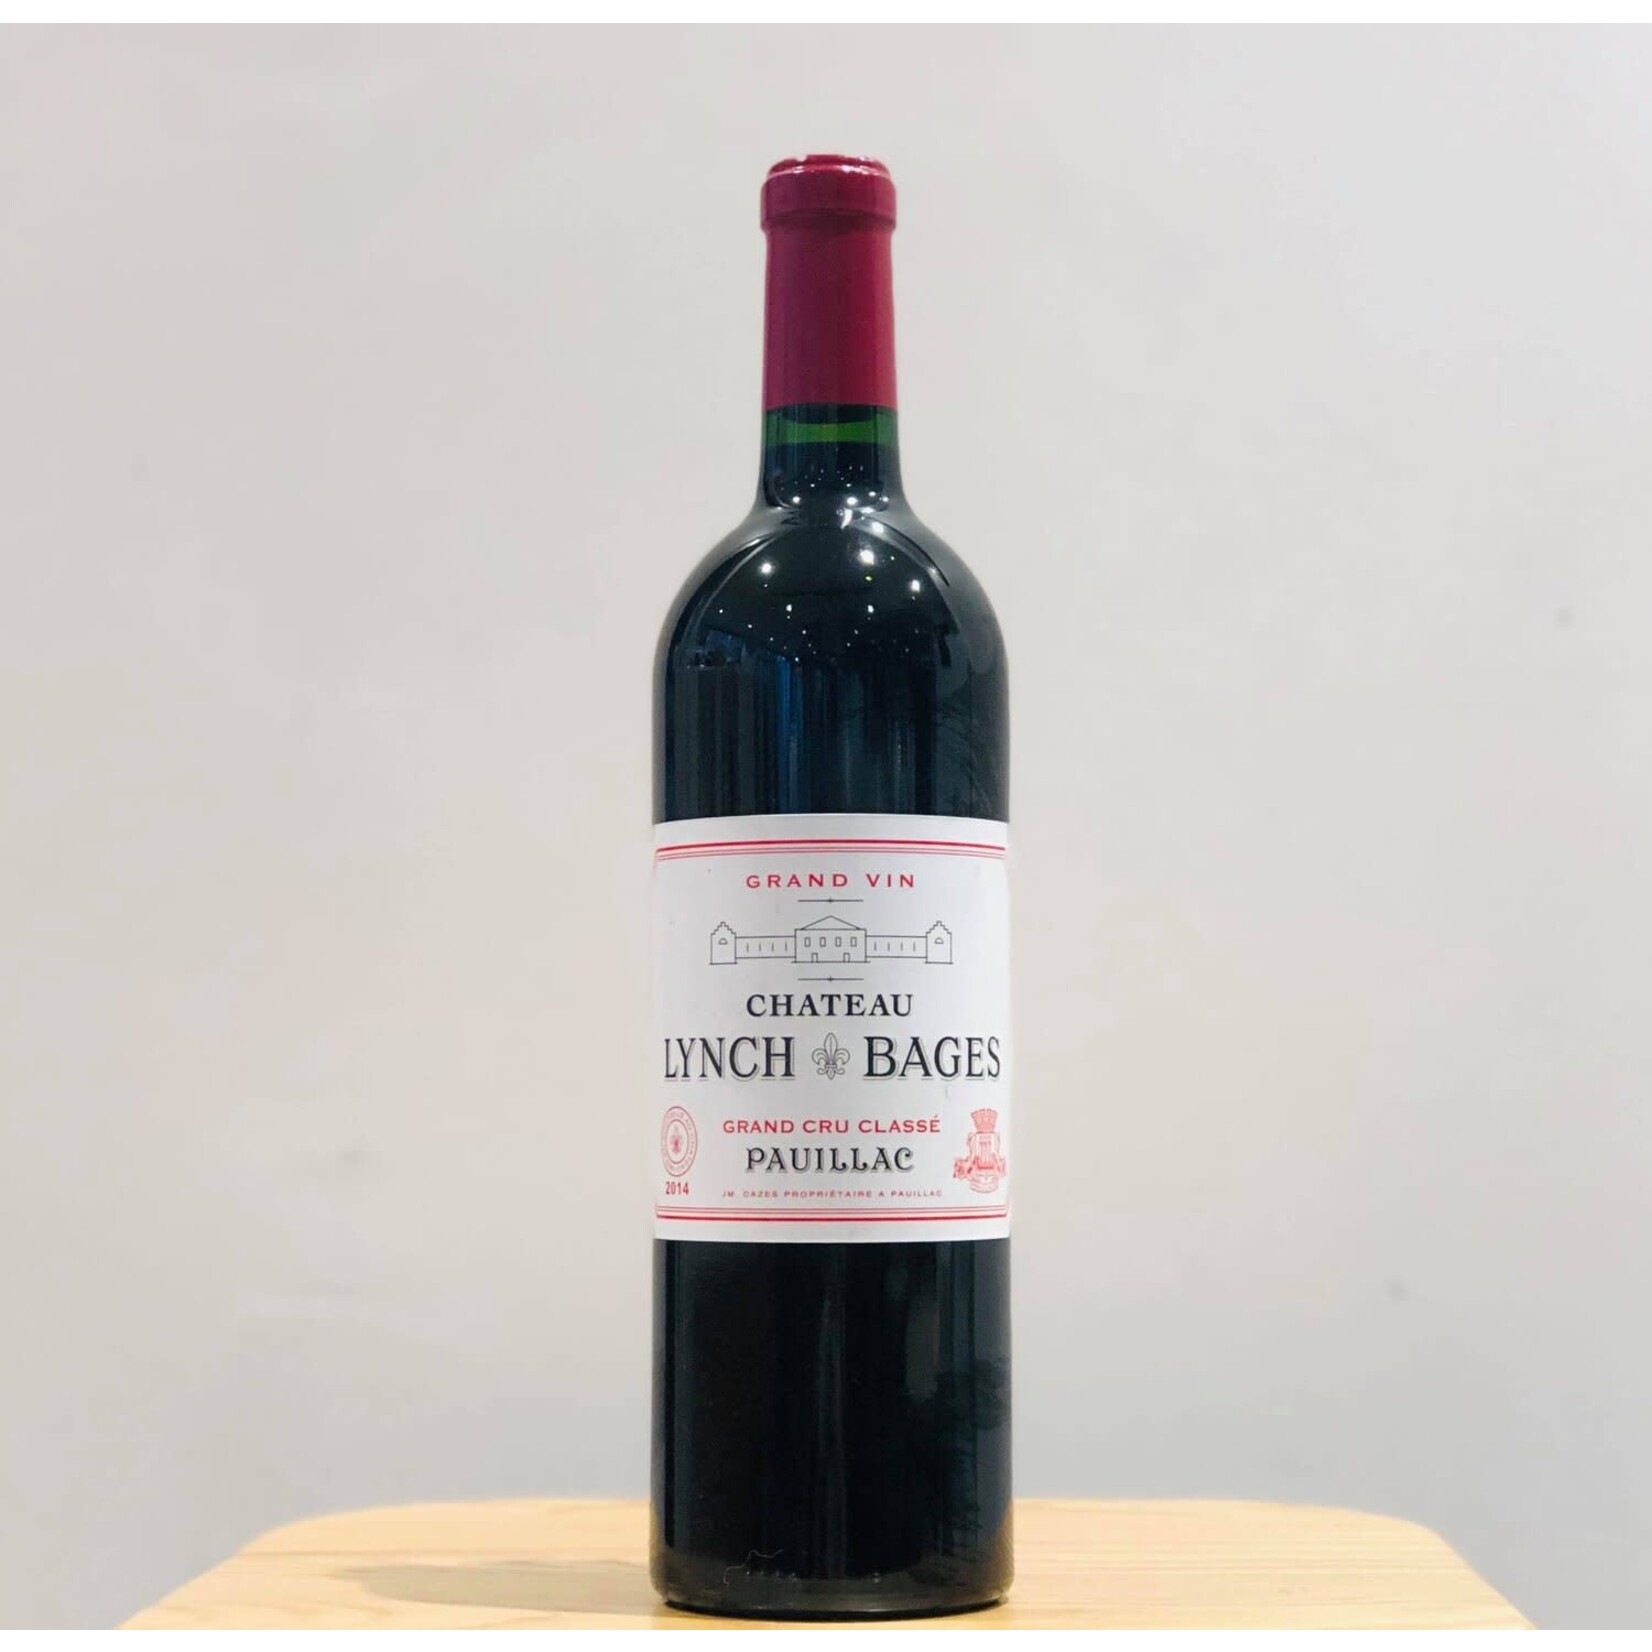 Wine Chateau Lynch Bages Pauillac 2009